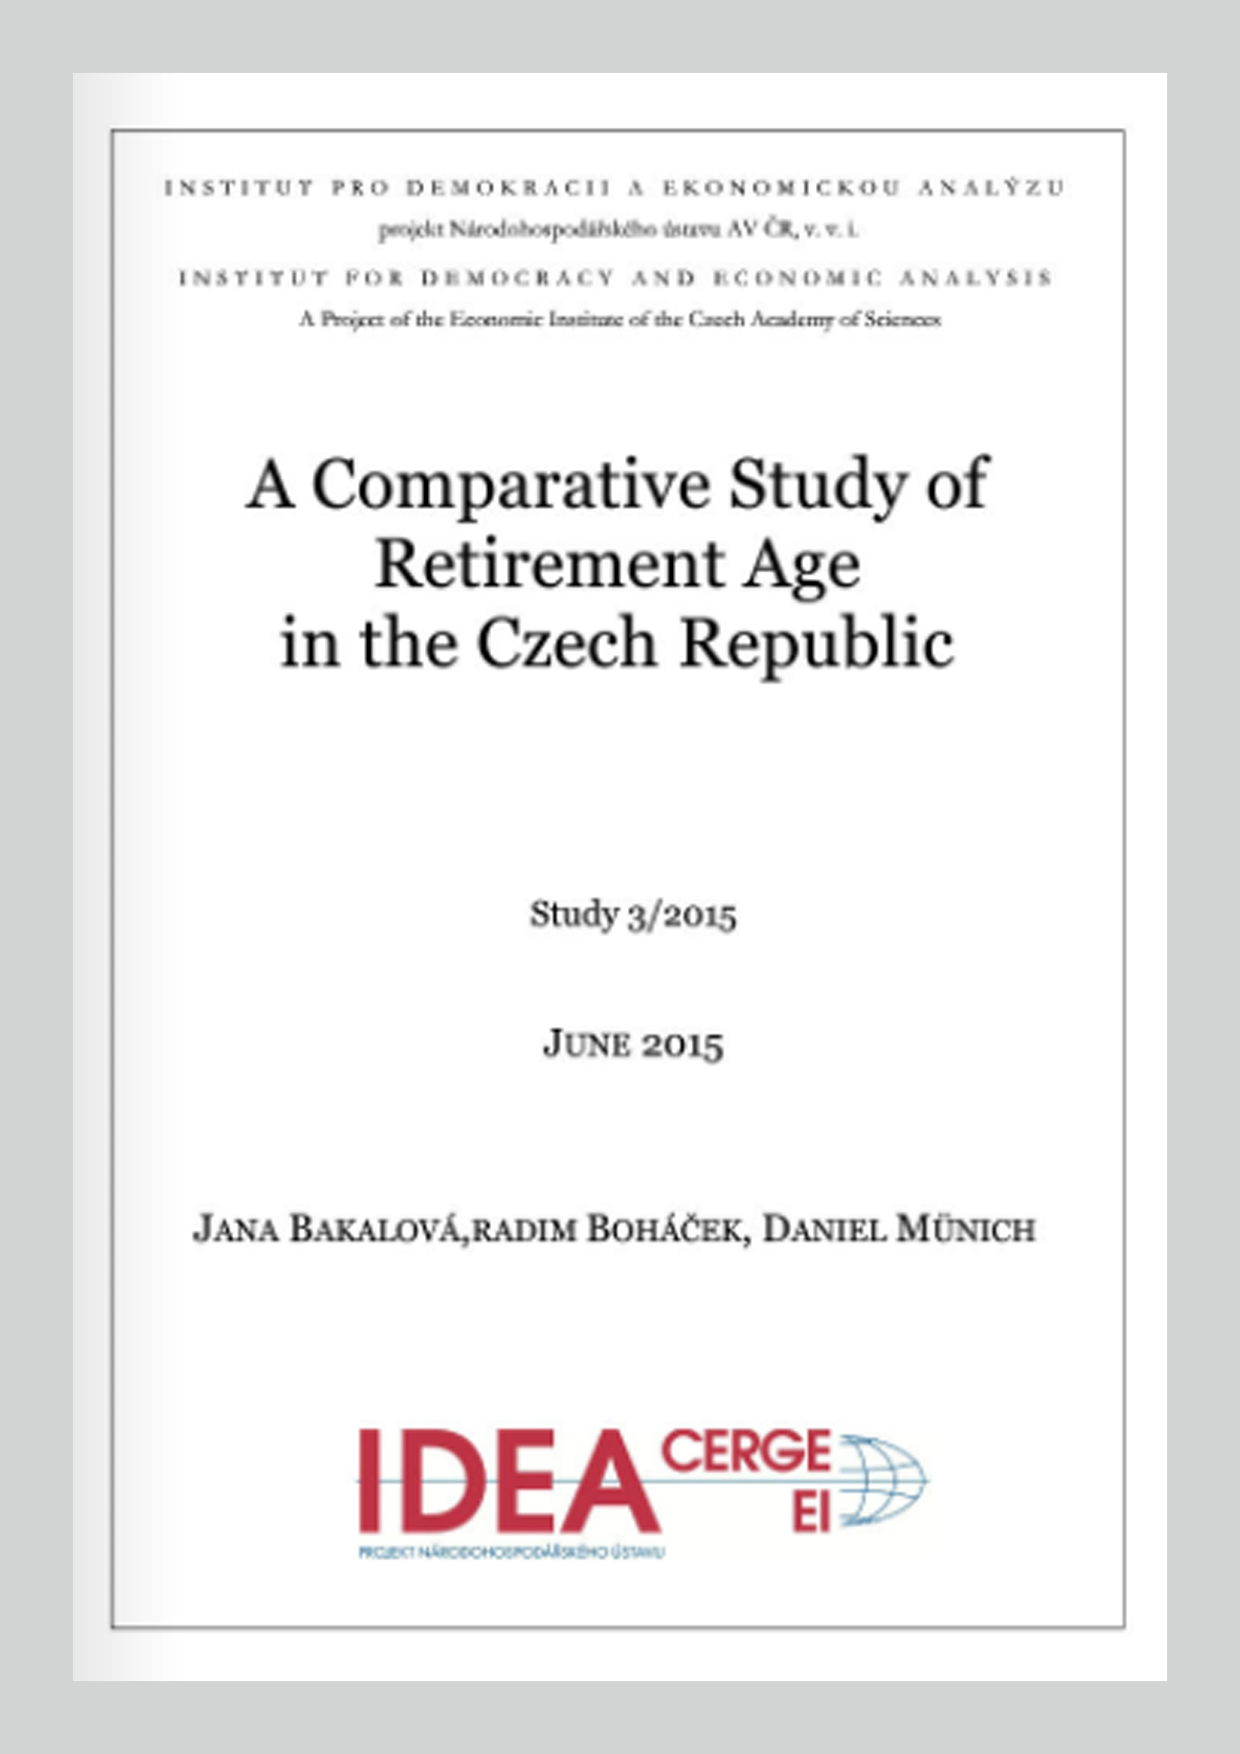 A Comparative Study of Retirement Age in the Czech Republic